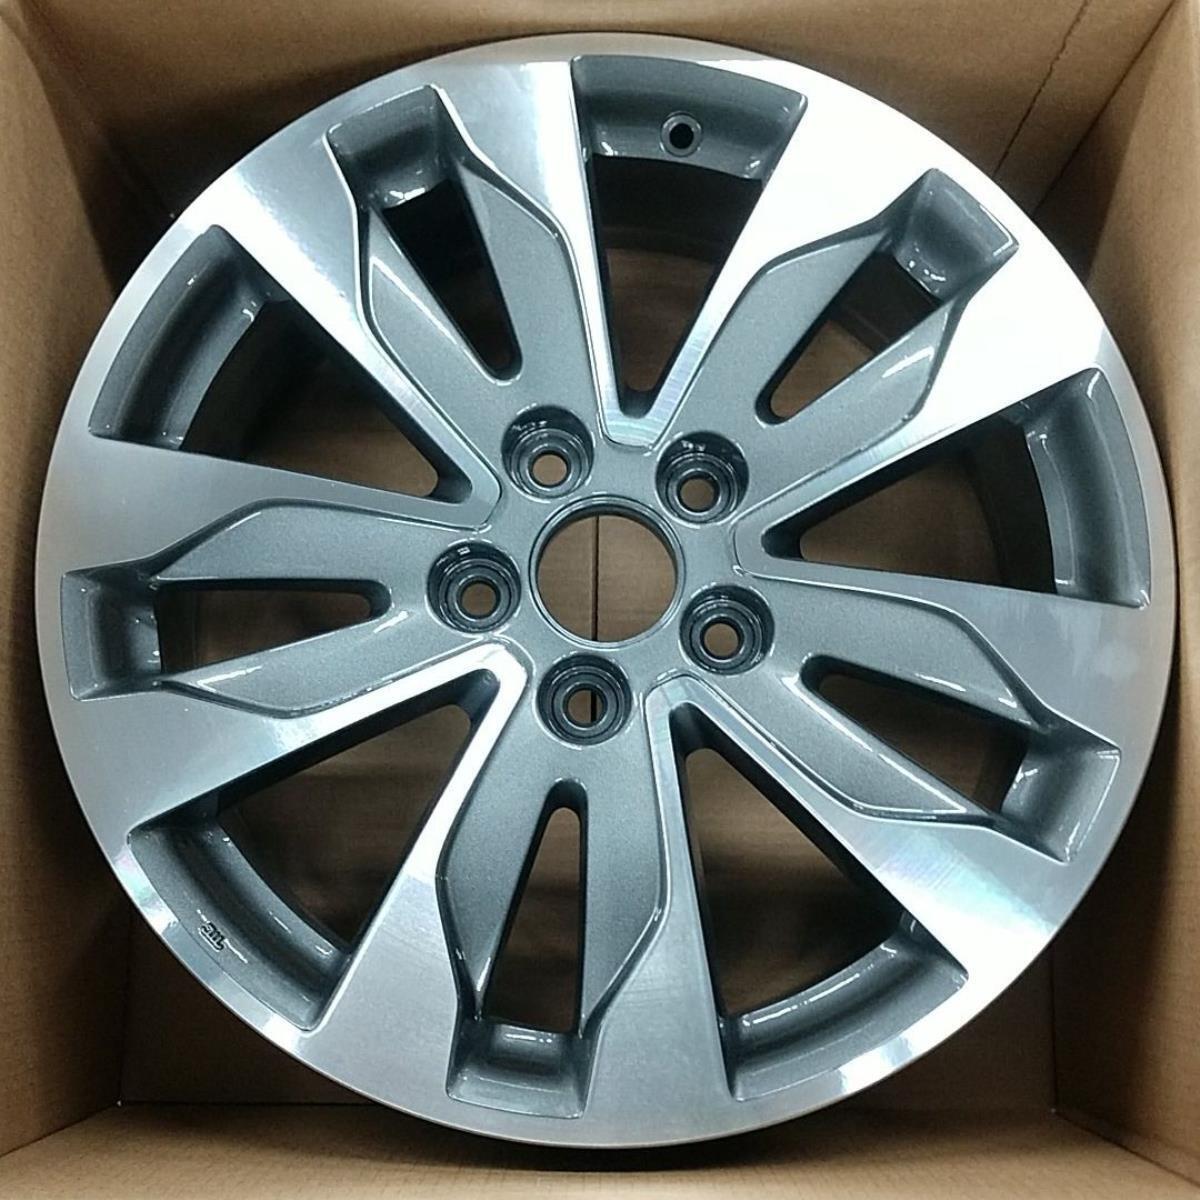 (1) Wheel Rim For Odyssey Recon OEM Nice Charcoal Machined